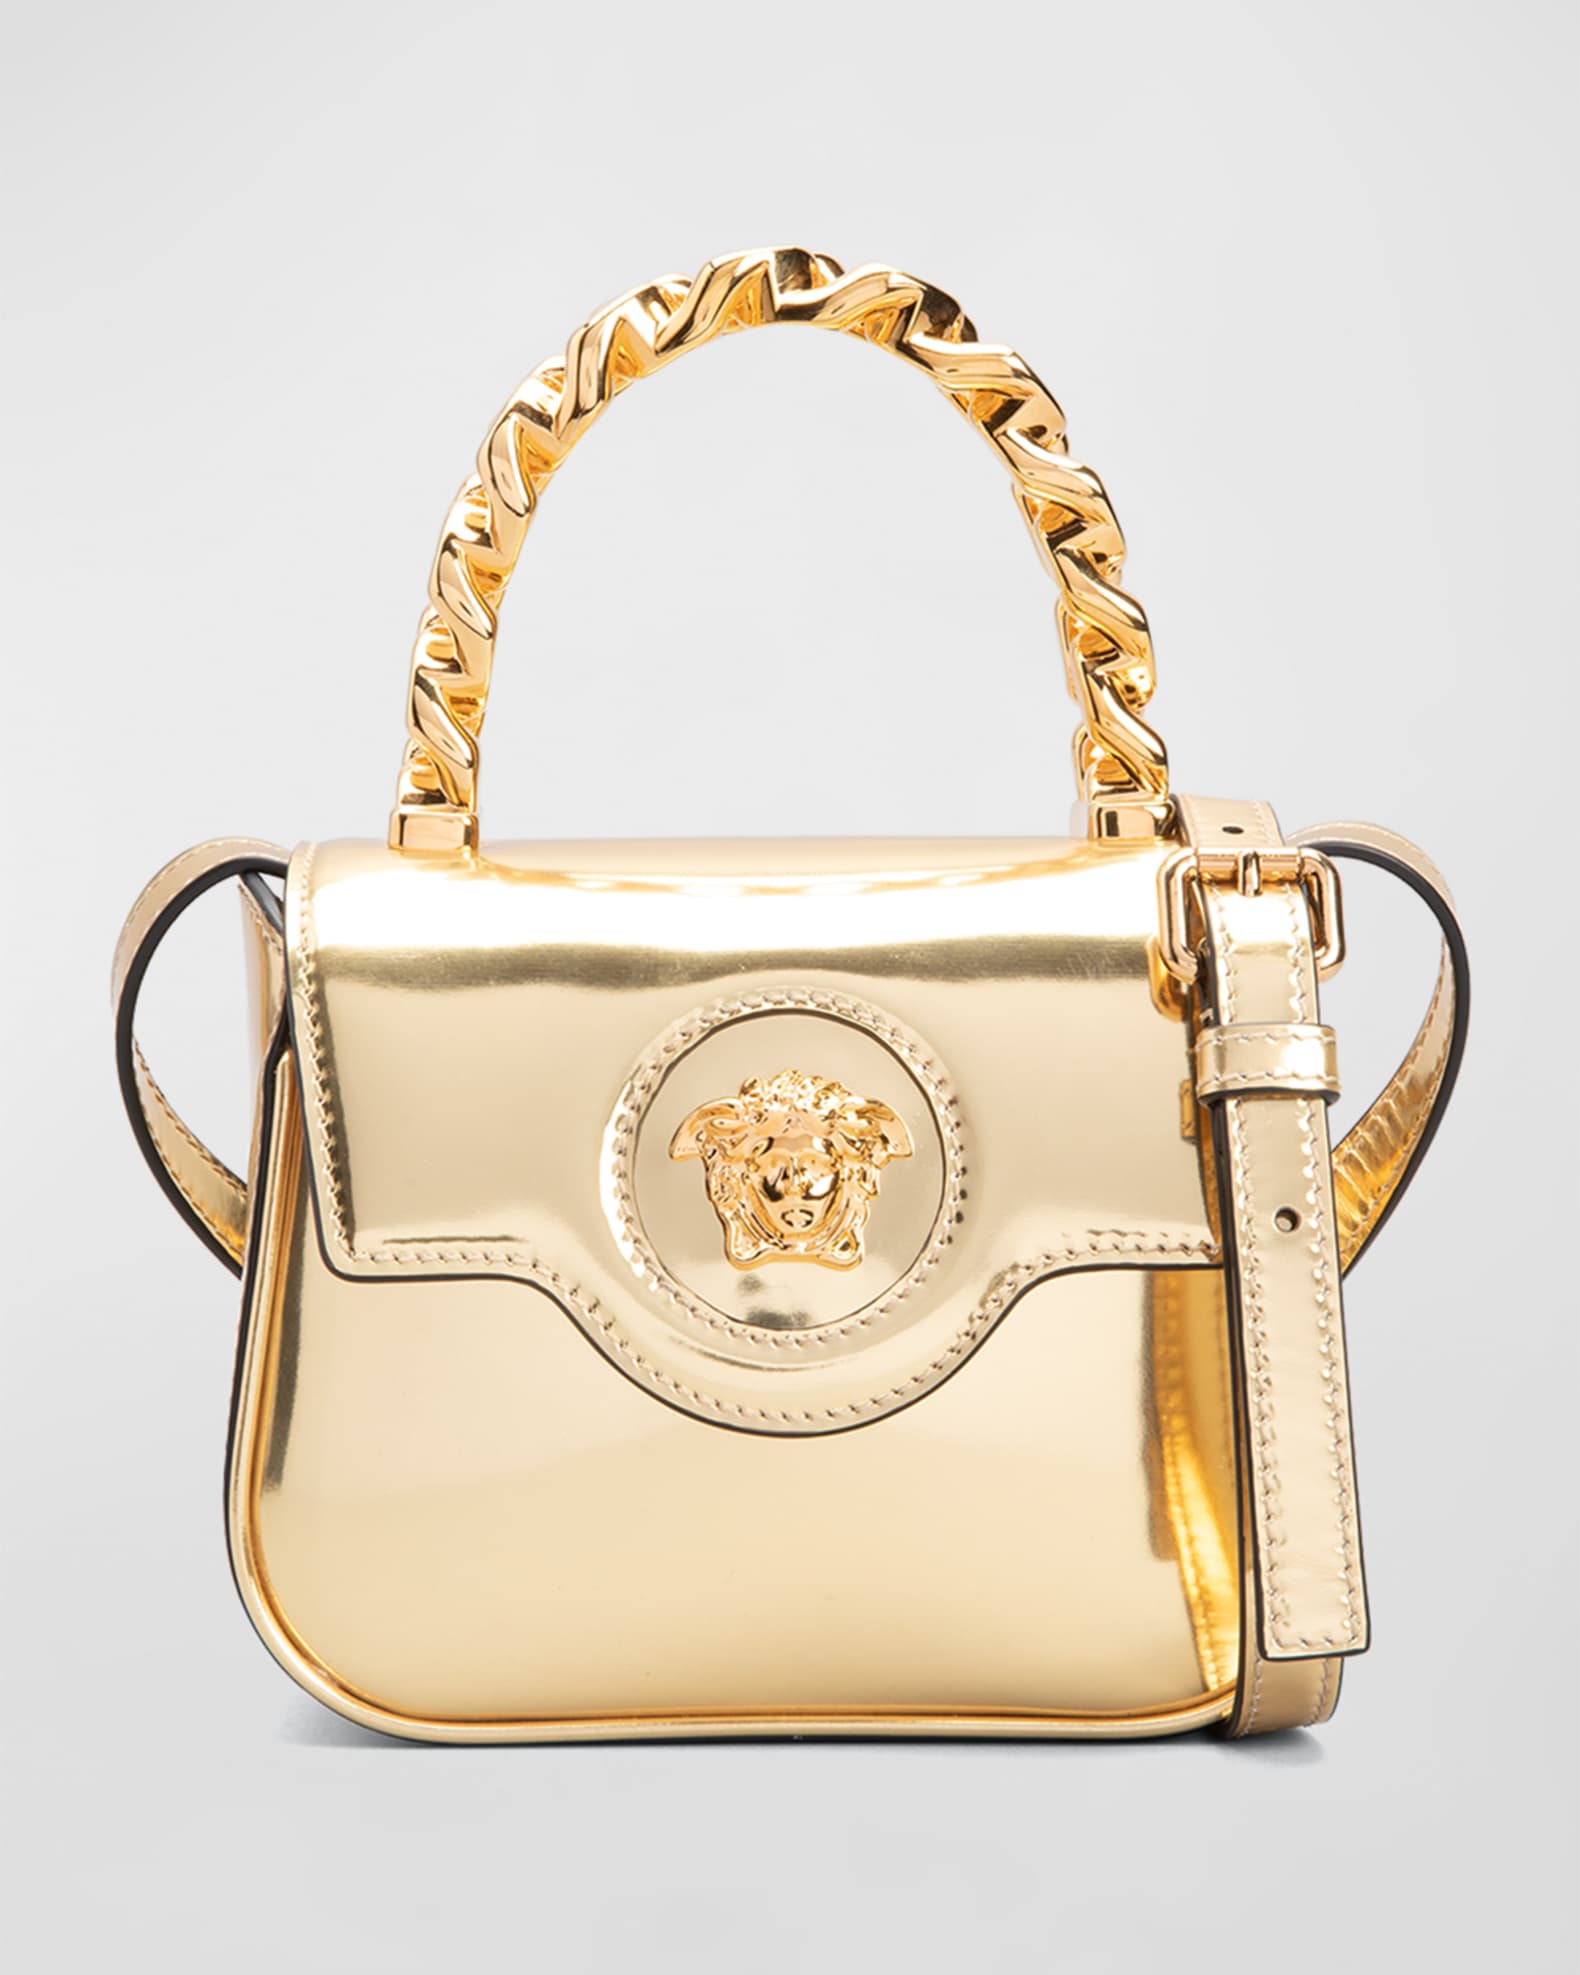 Versace Medusa Patent Chain Top-handle Crossbody Bag in Red